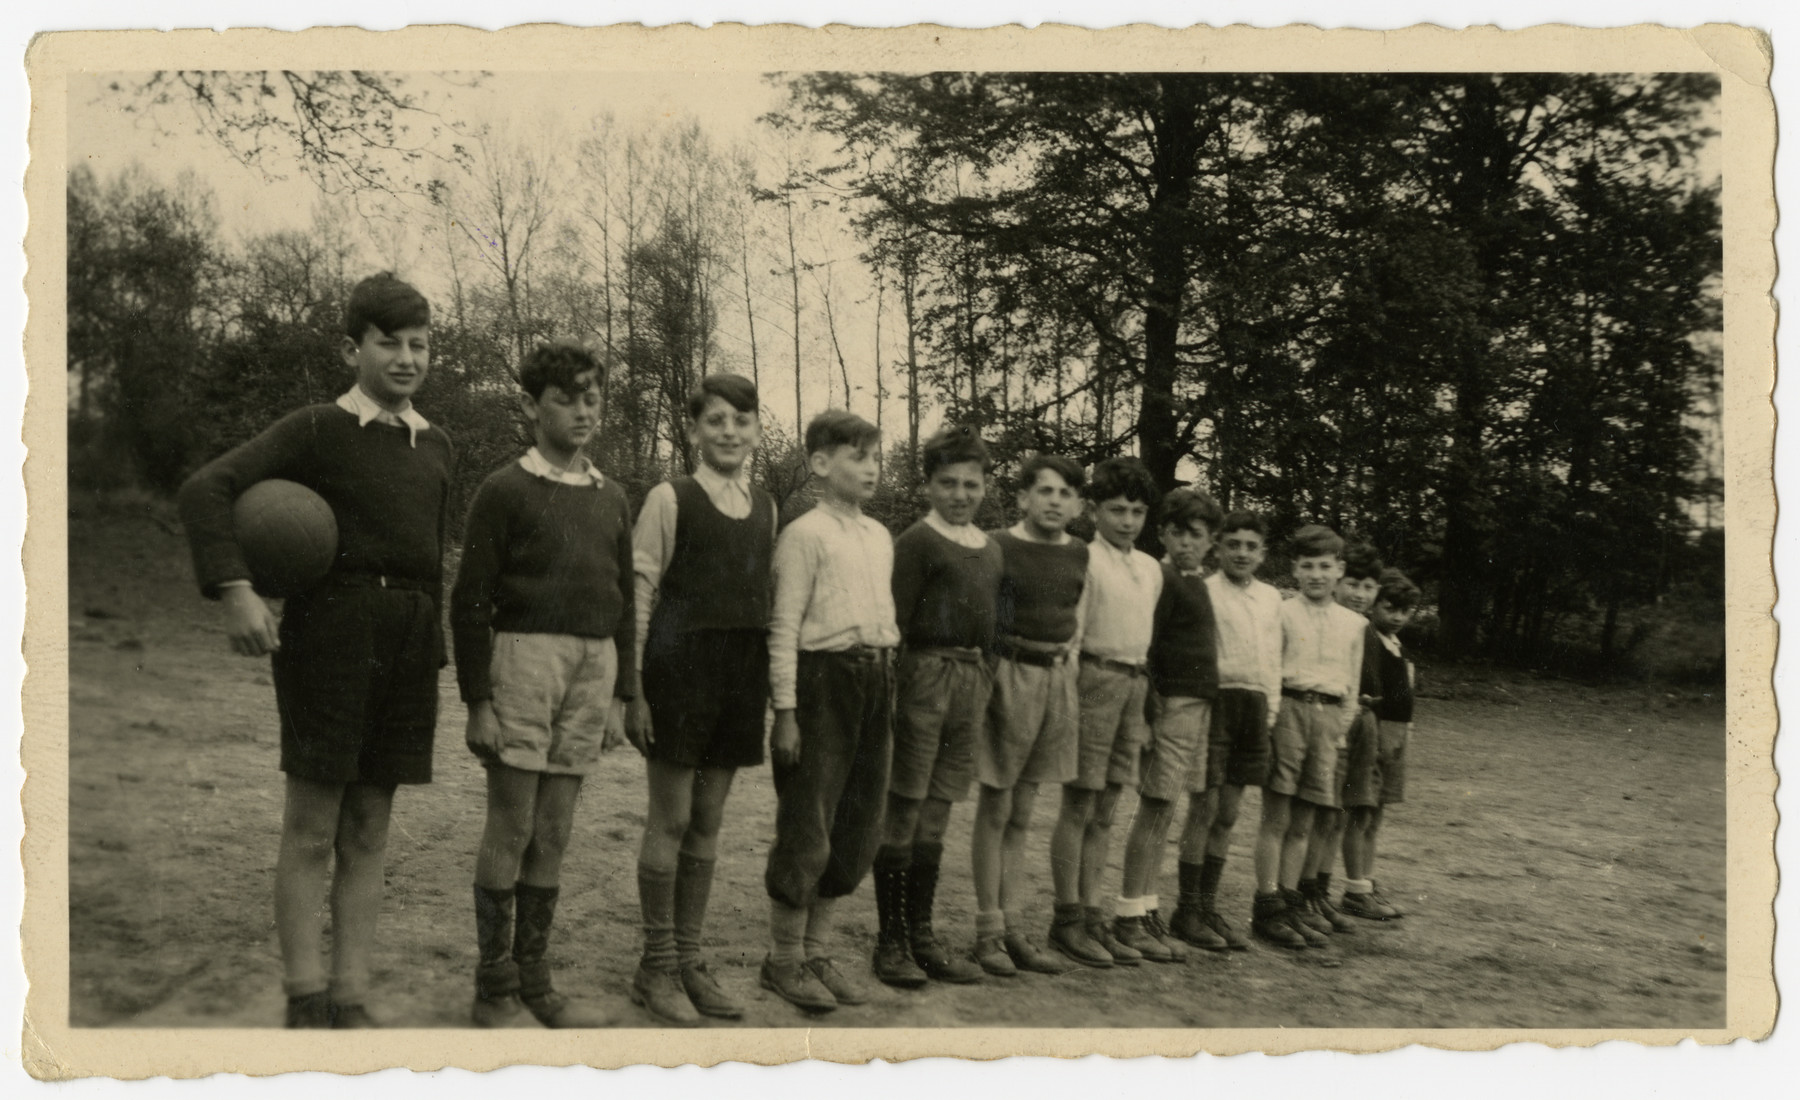 Jewish orphans in Home de la-Bas in Aische-en-Refail line up with a soccer ball.

Among those pictured are from left to right: Hans (last name ?), Leon Pec, Maurice Sorgenstein, Henri Beigel and Charles Rojer.  The others are unidentified.